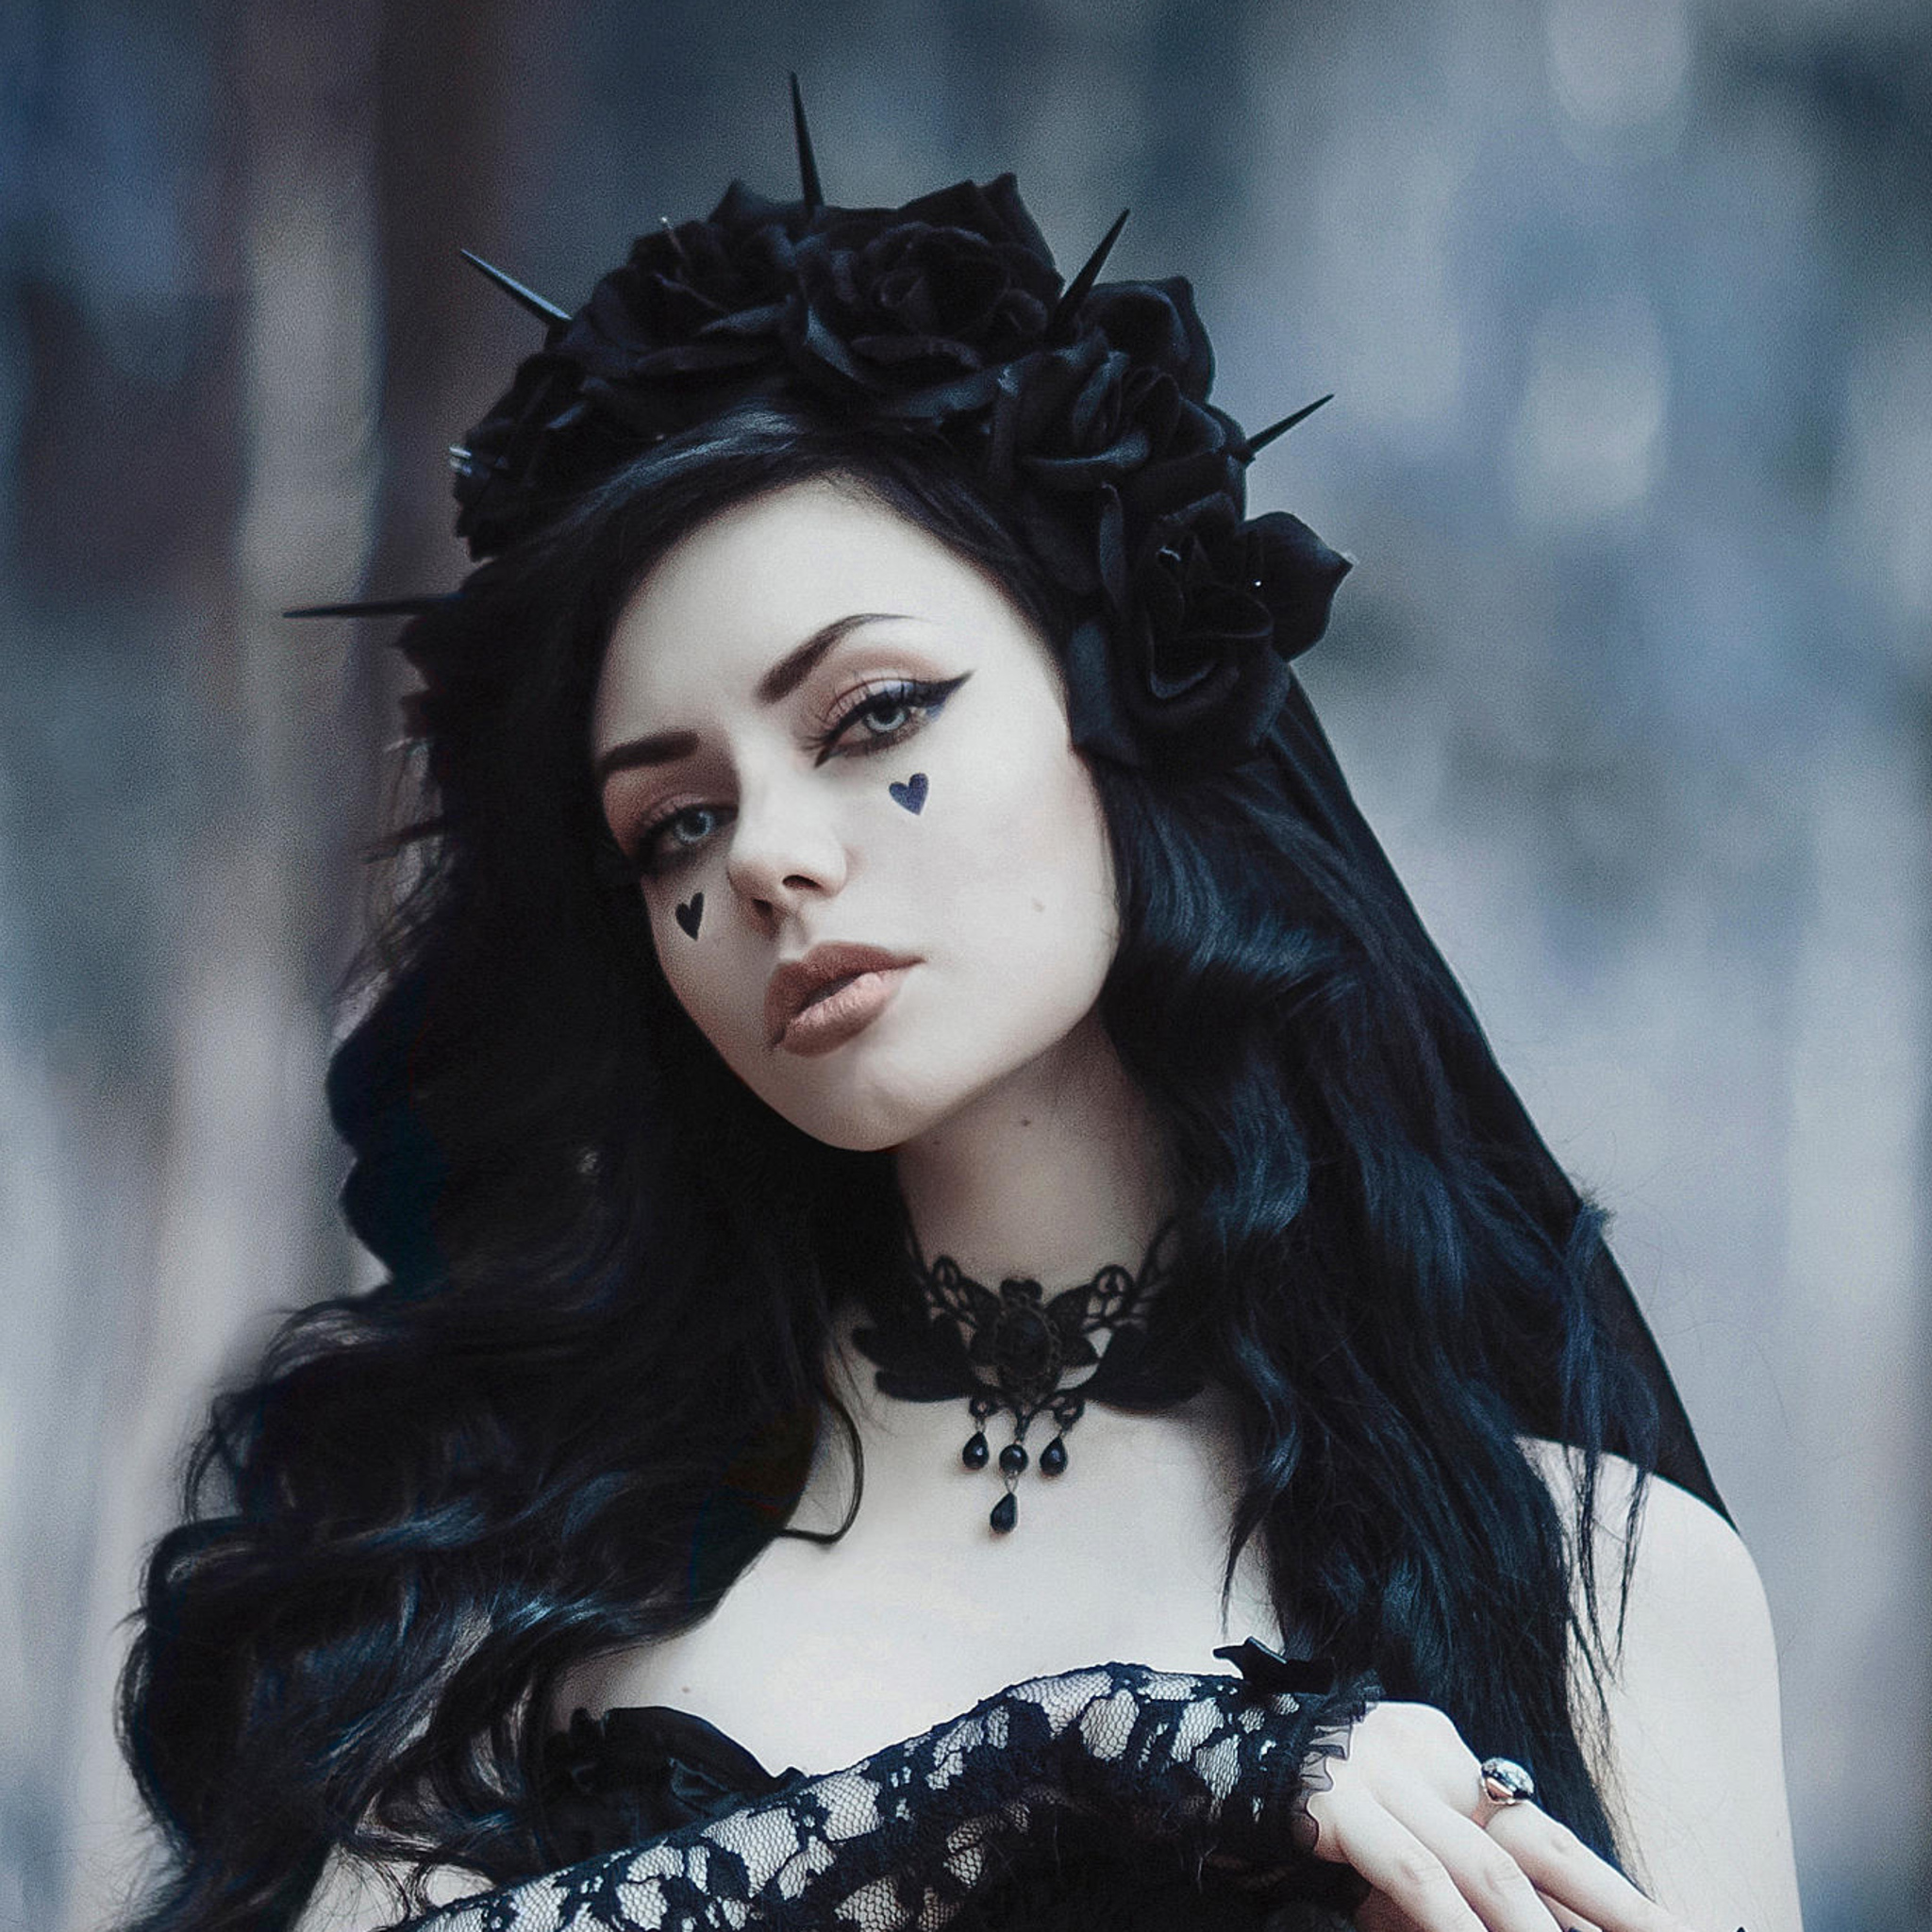 2048x2048 Gothic Bride In Black Dress Ipad Air ,HD 4k Wallpapers,Images ...